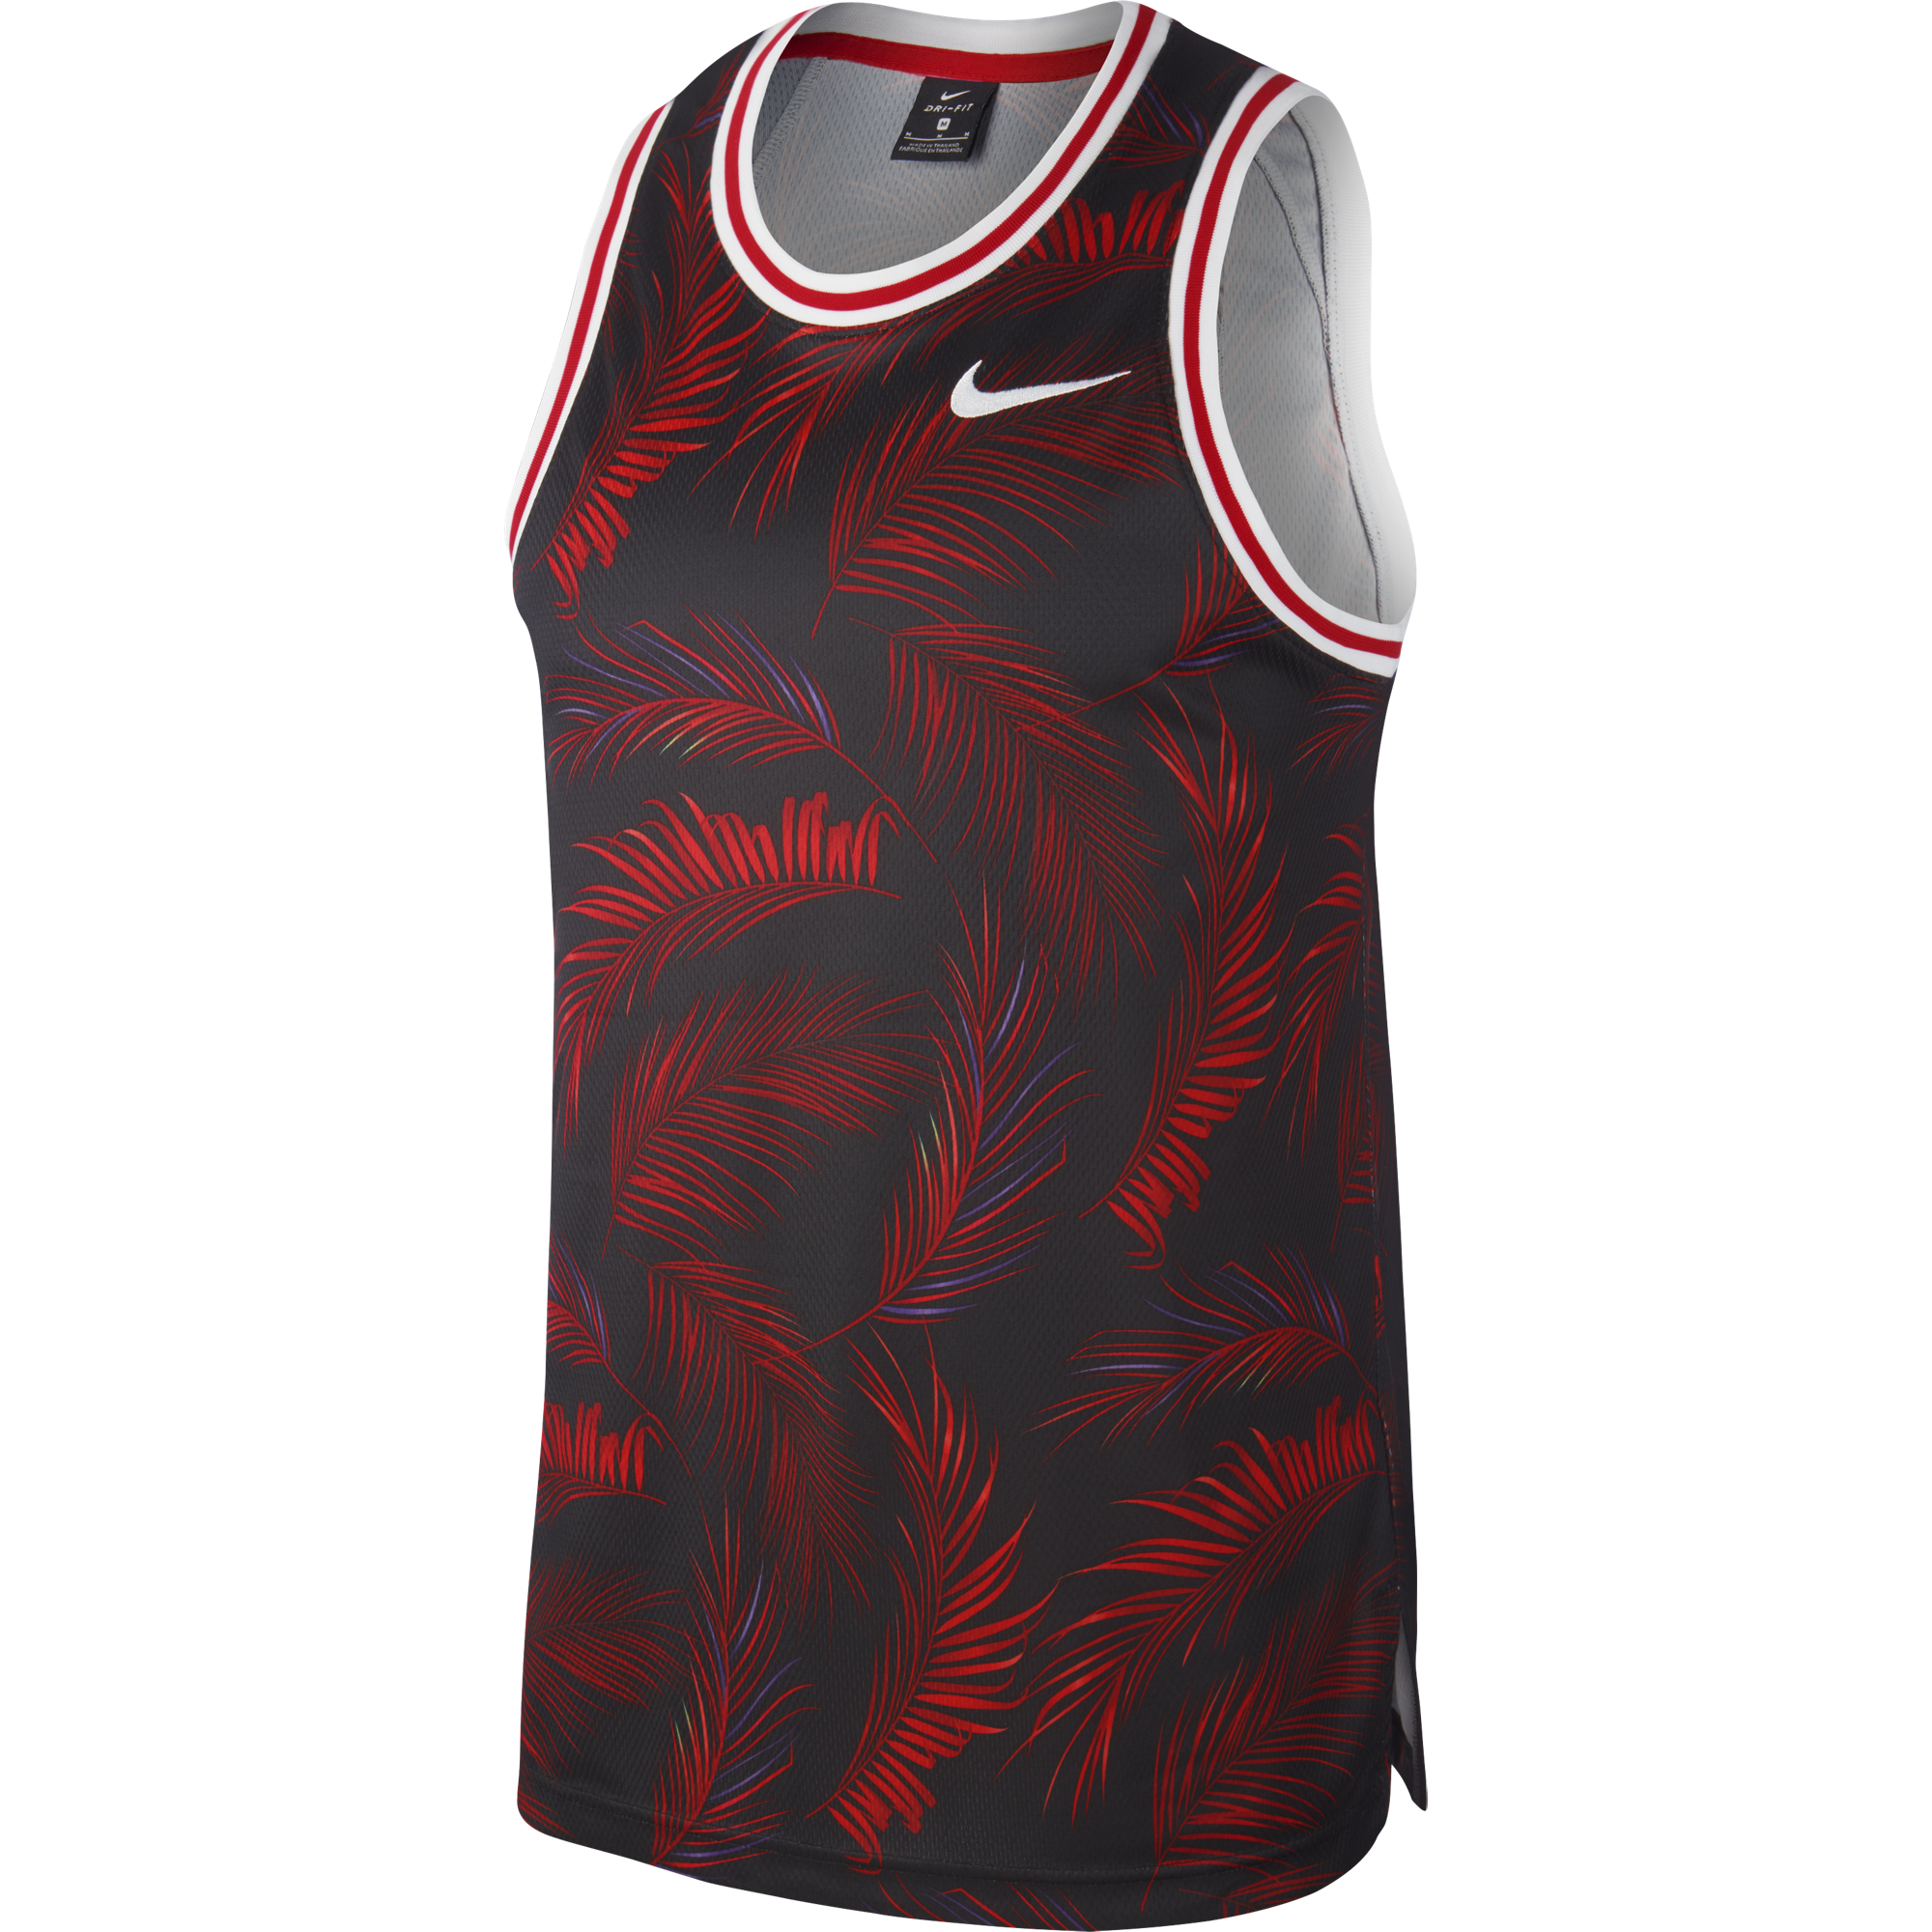 NIKE DRI-FIT DNA FLORAL JERSEY UNIVERSITY RED